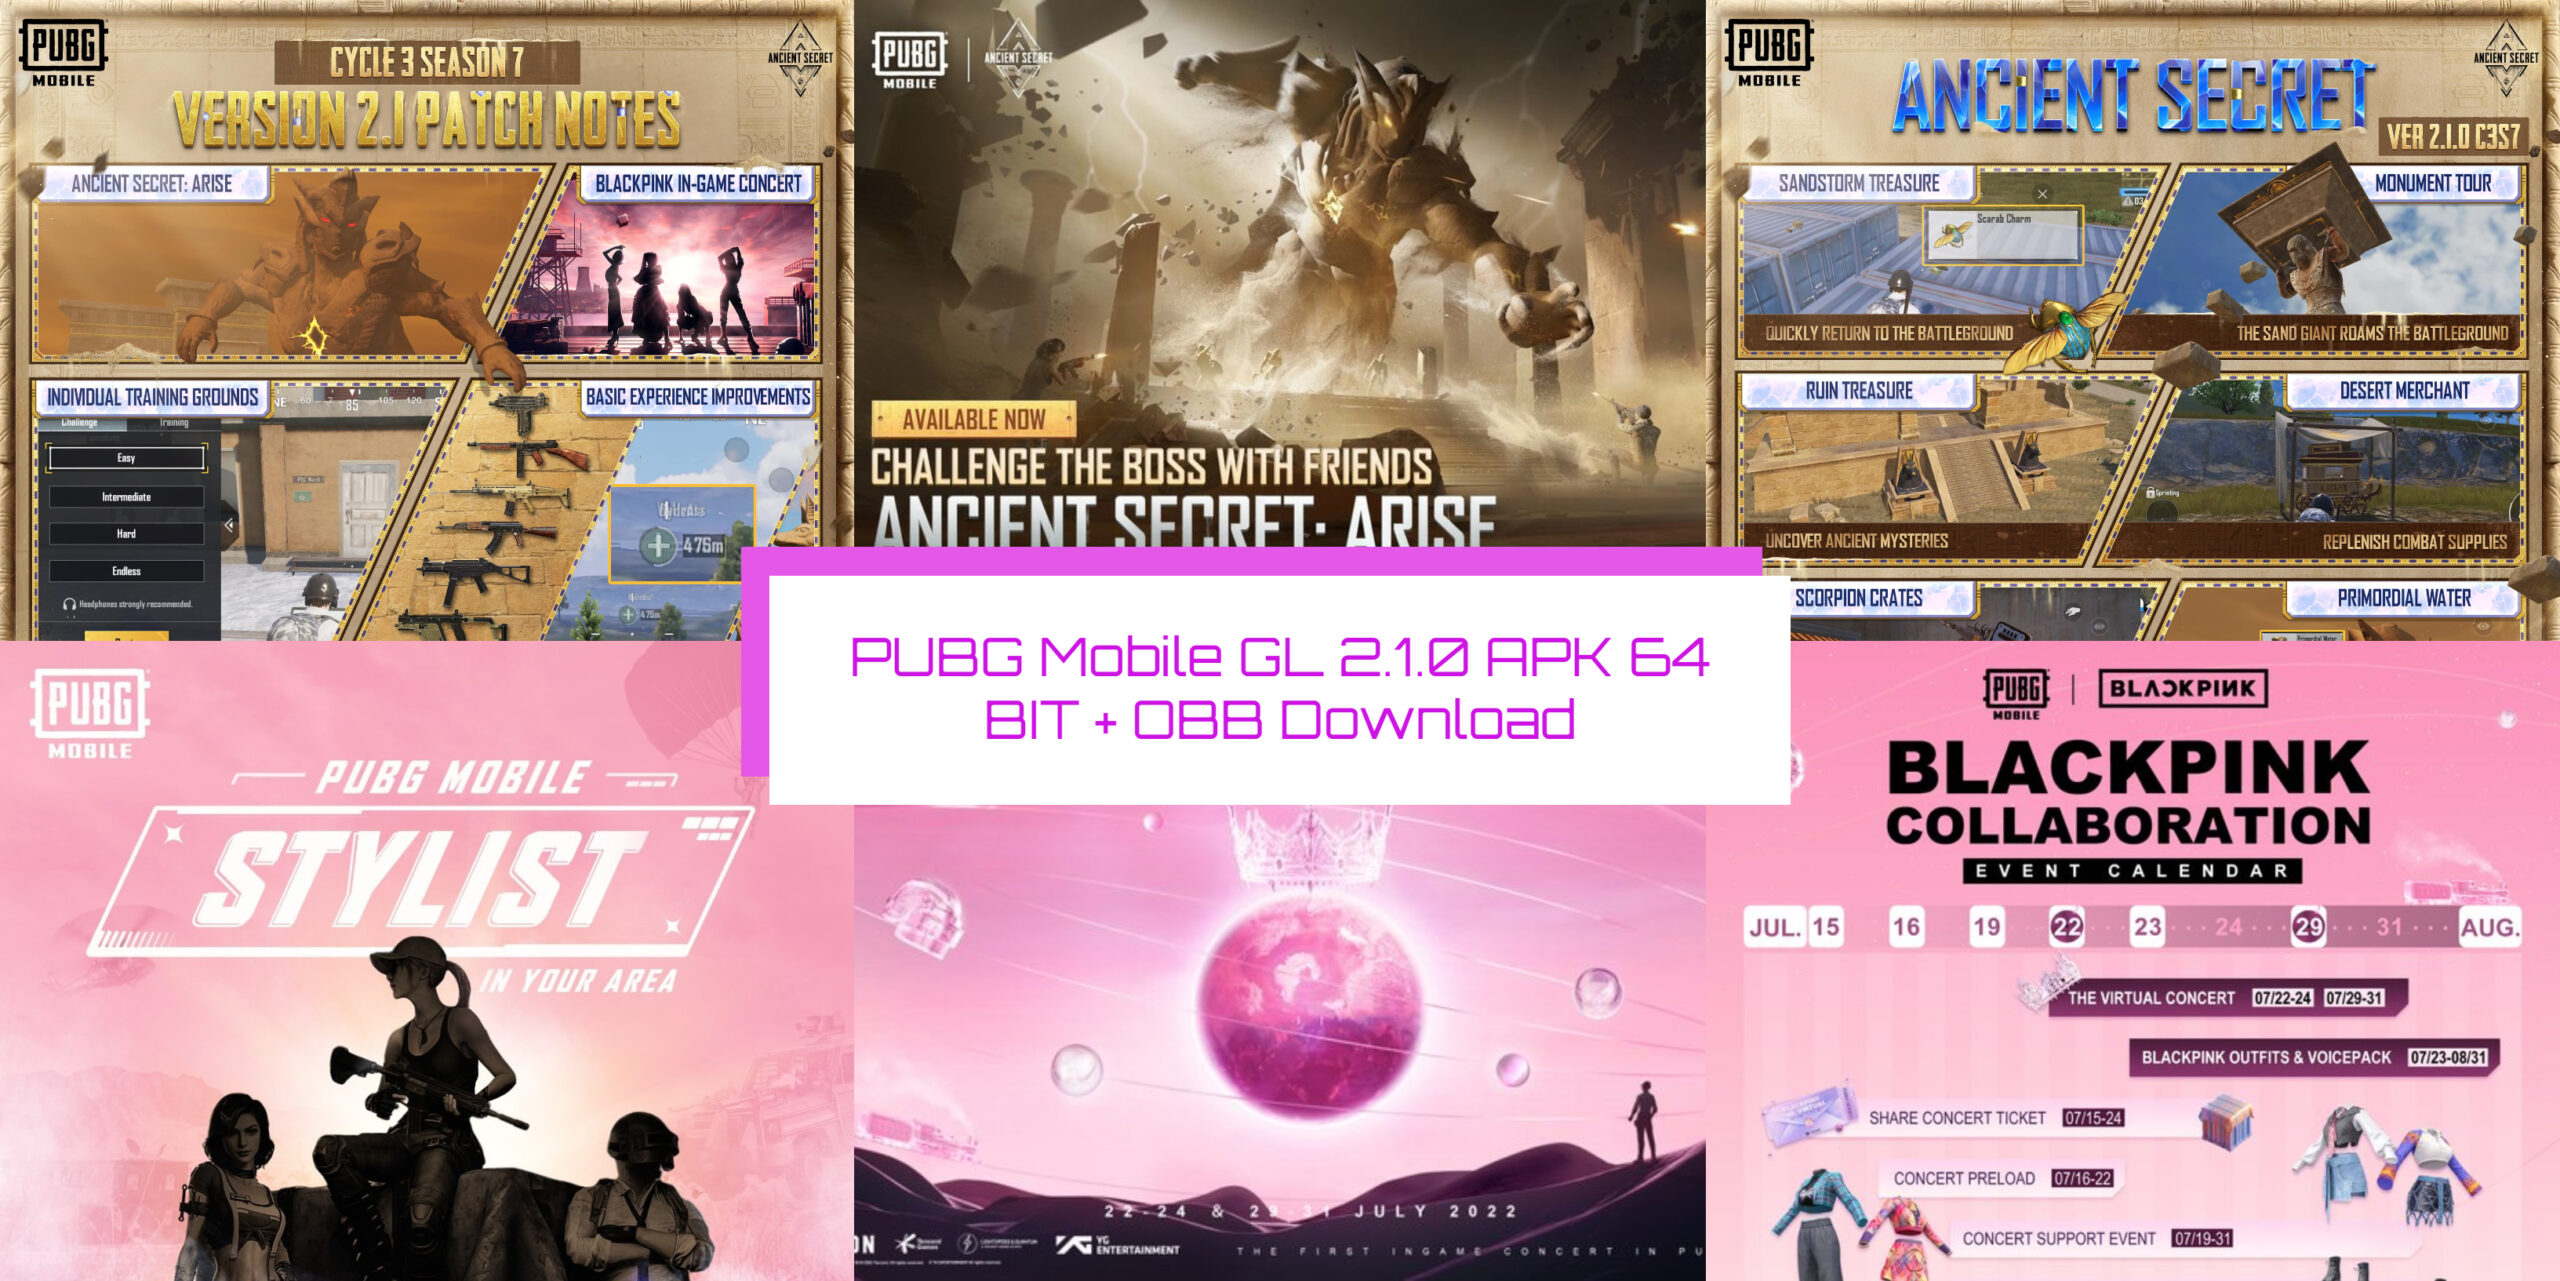 You are currently viewing PUBG Mobile Global 2.1 APK 64 BIT + OBB Download